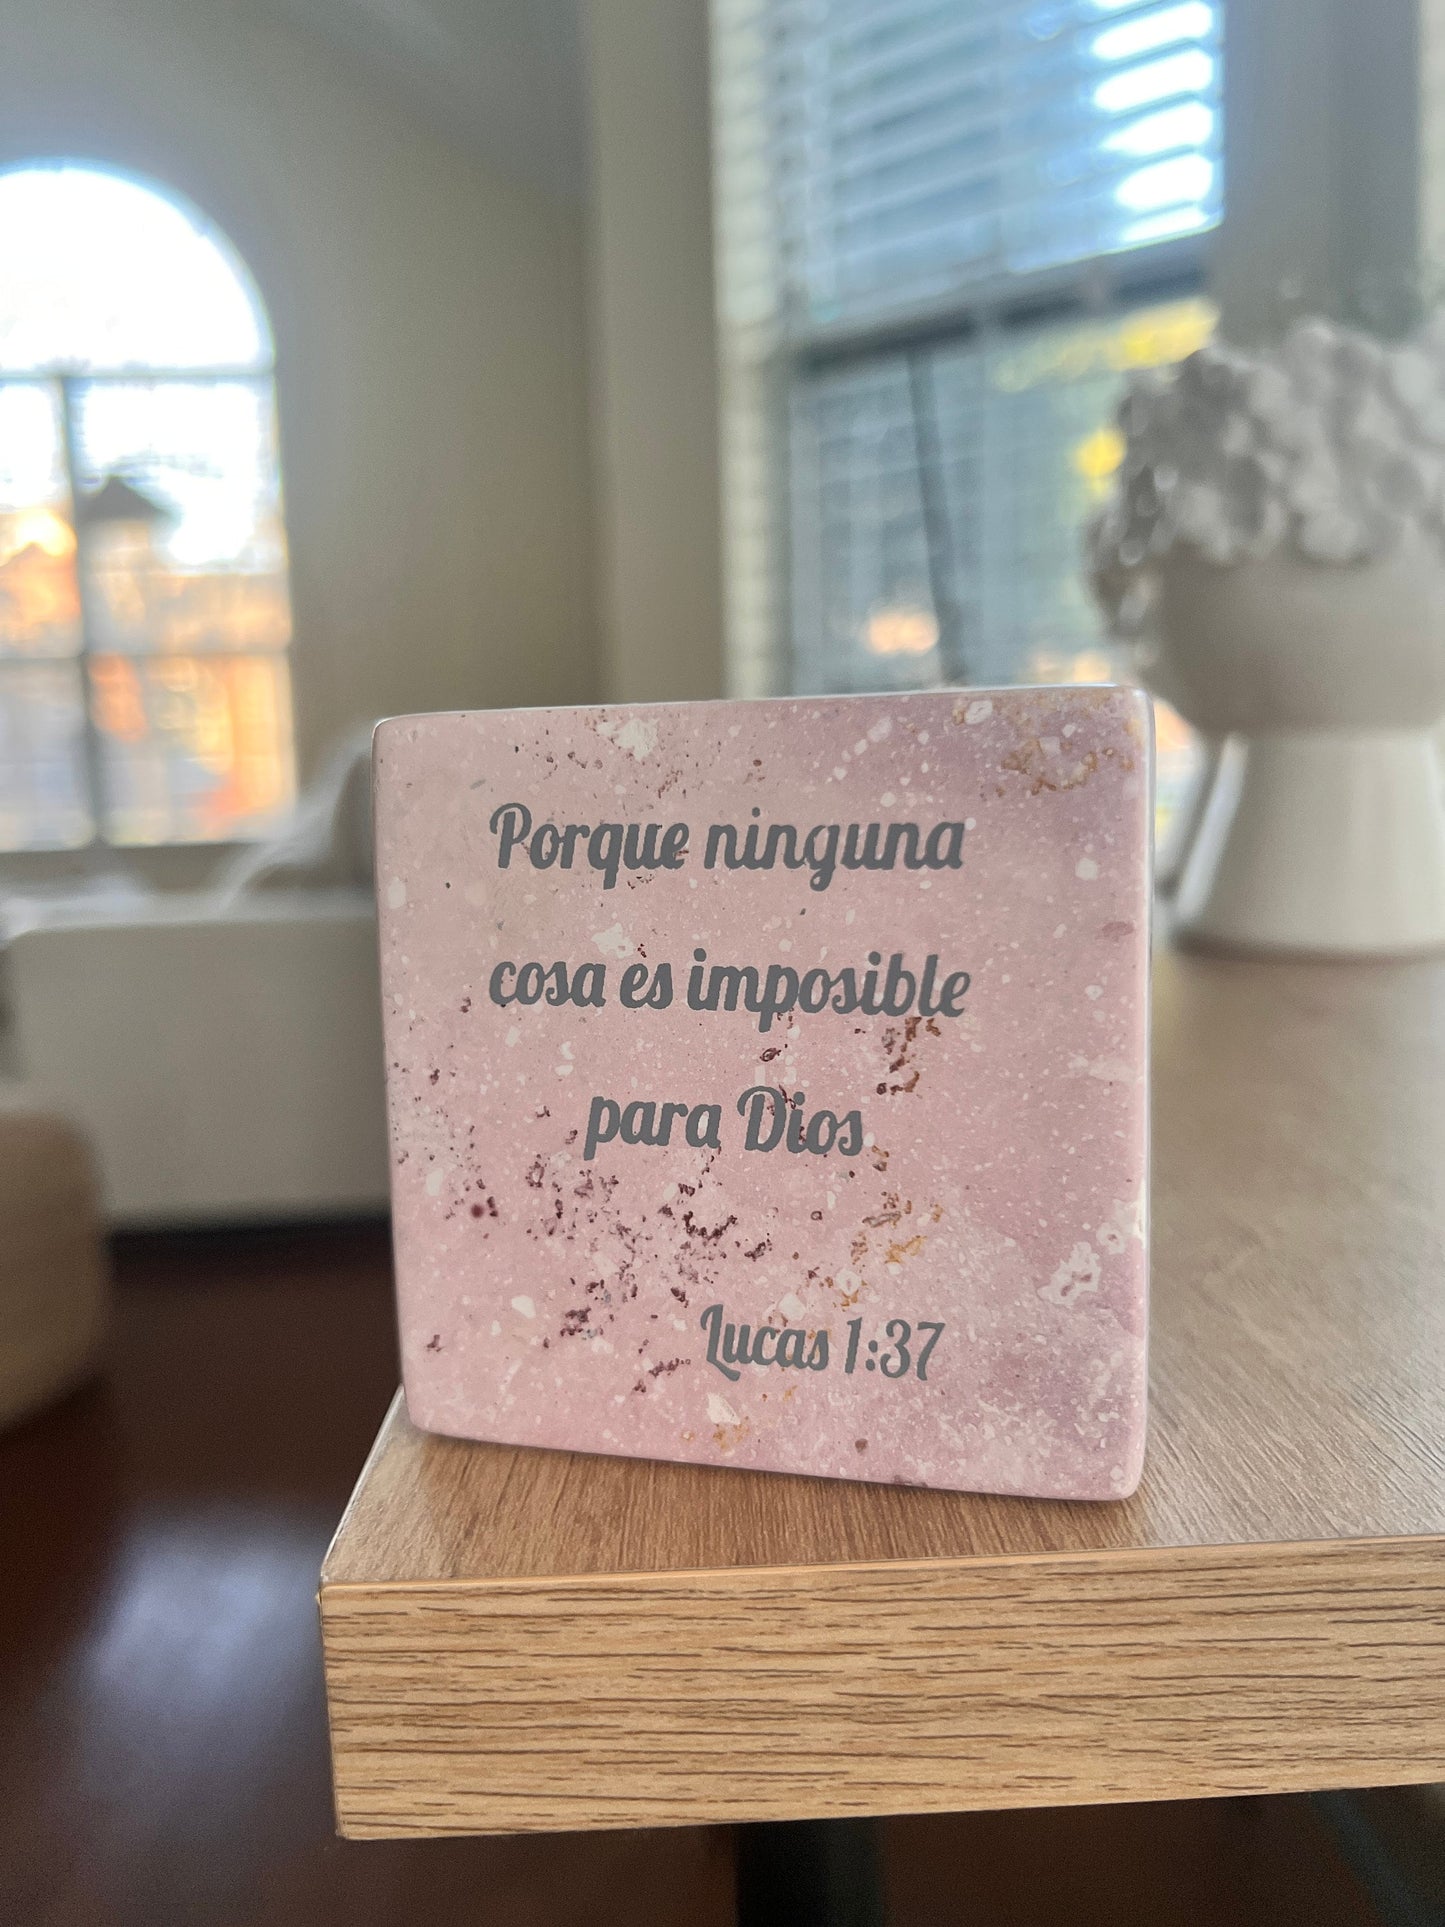 Hand-Carved Soapstone Scripture 3" by 3" - Bible Verse Lucas 1:37 - Español